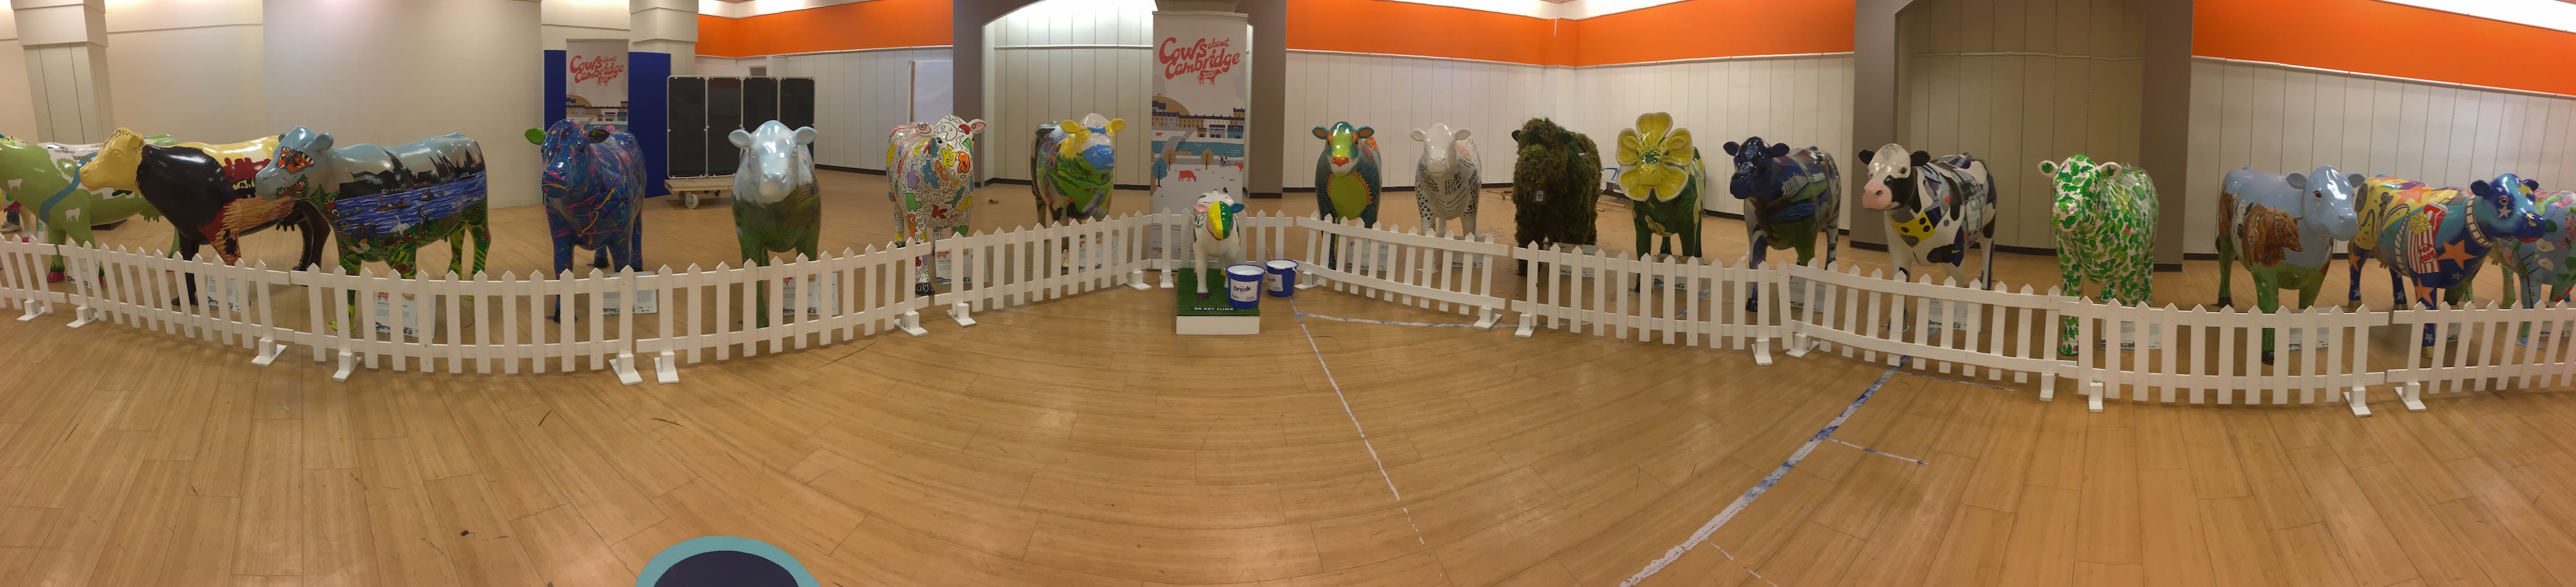 Panoramic view of 18 cows on display in the Grafton Centre